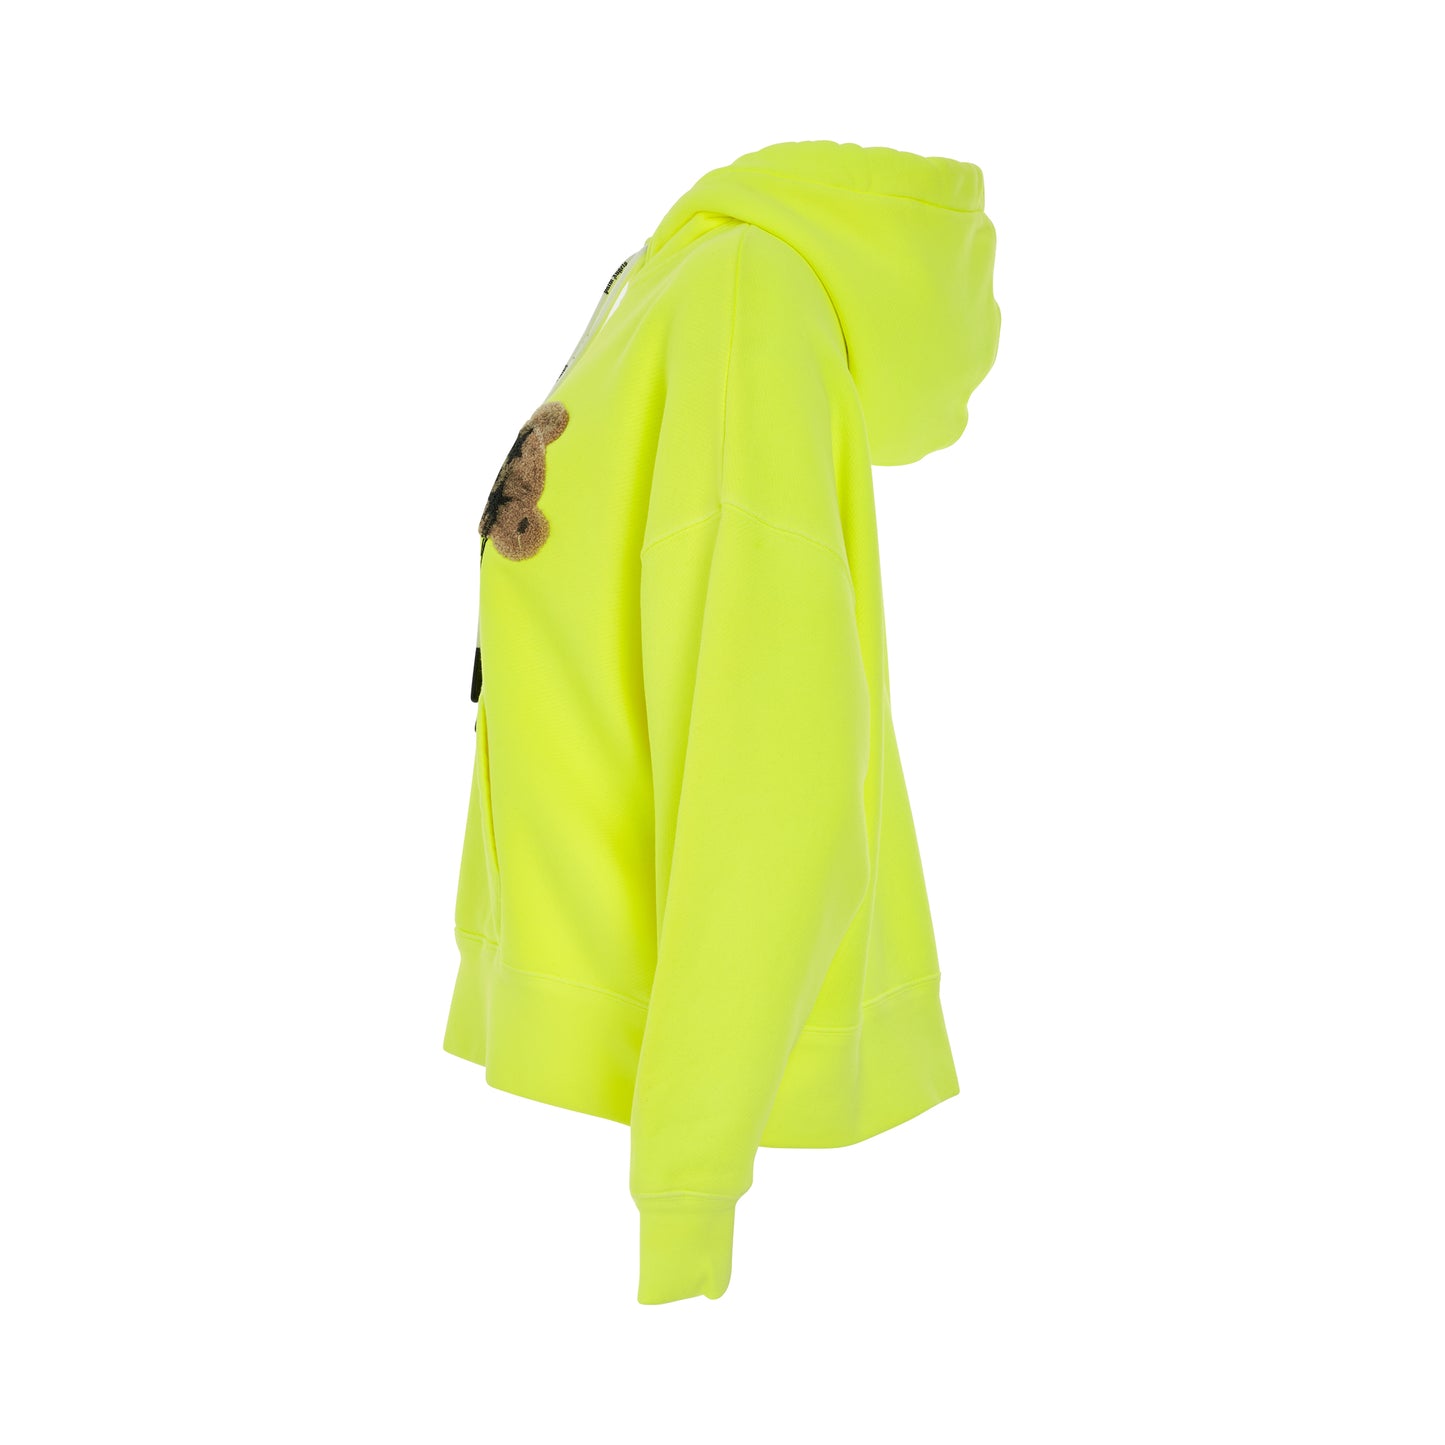 Sprayed PA Bear Hoodie in Yellow Fluo